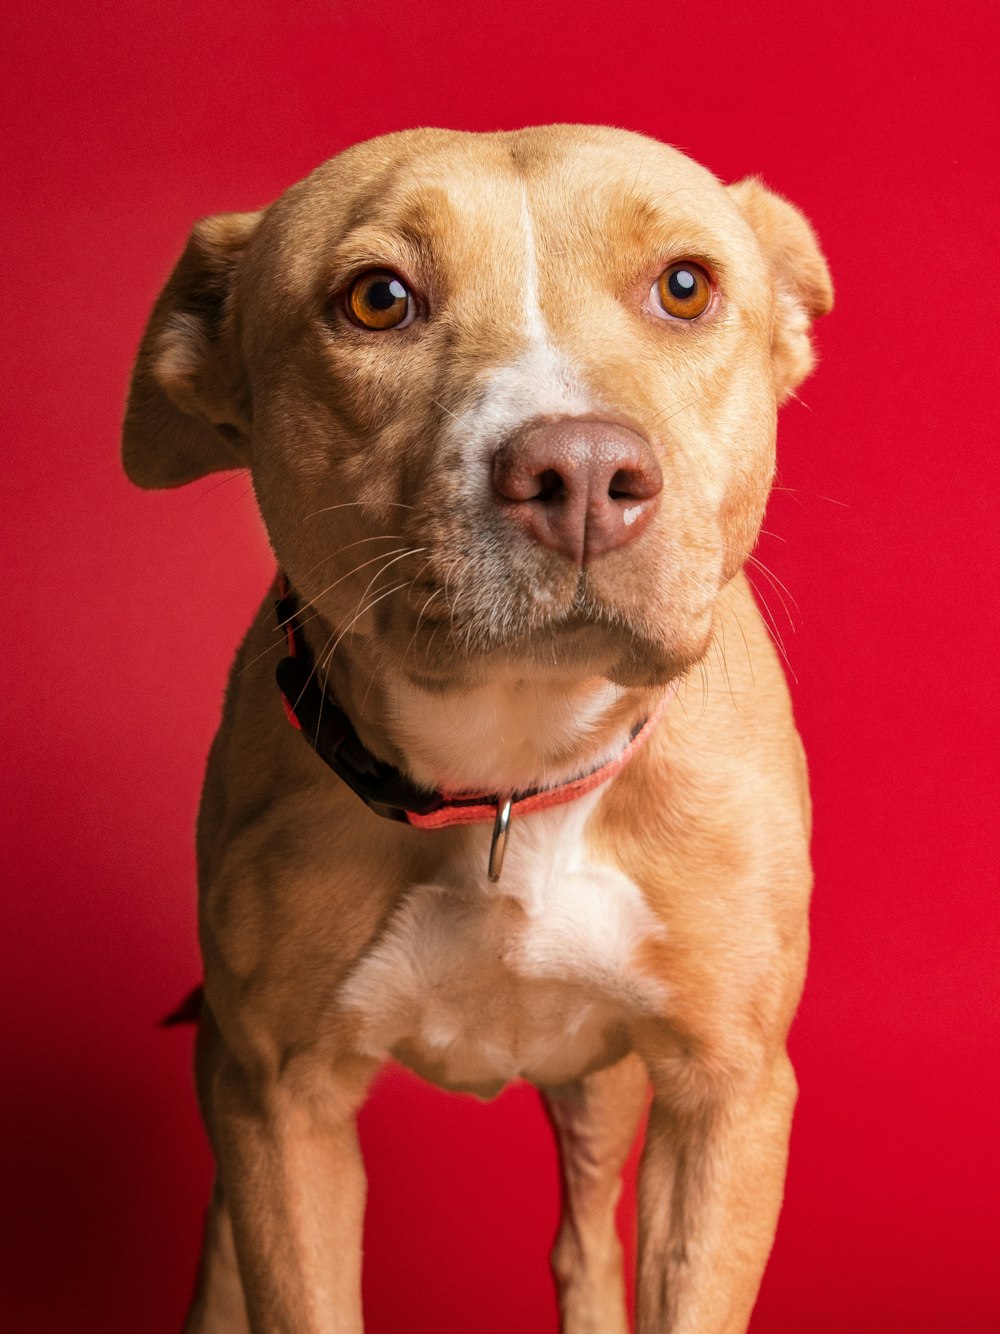 a close up of a dog on a red background